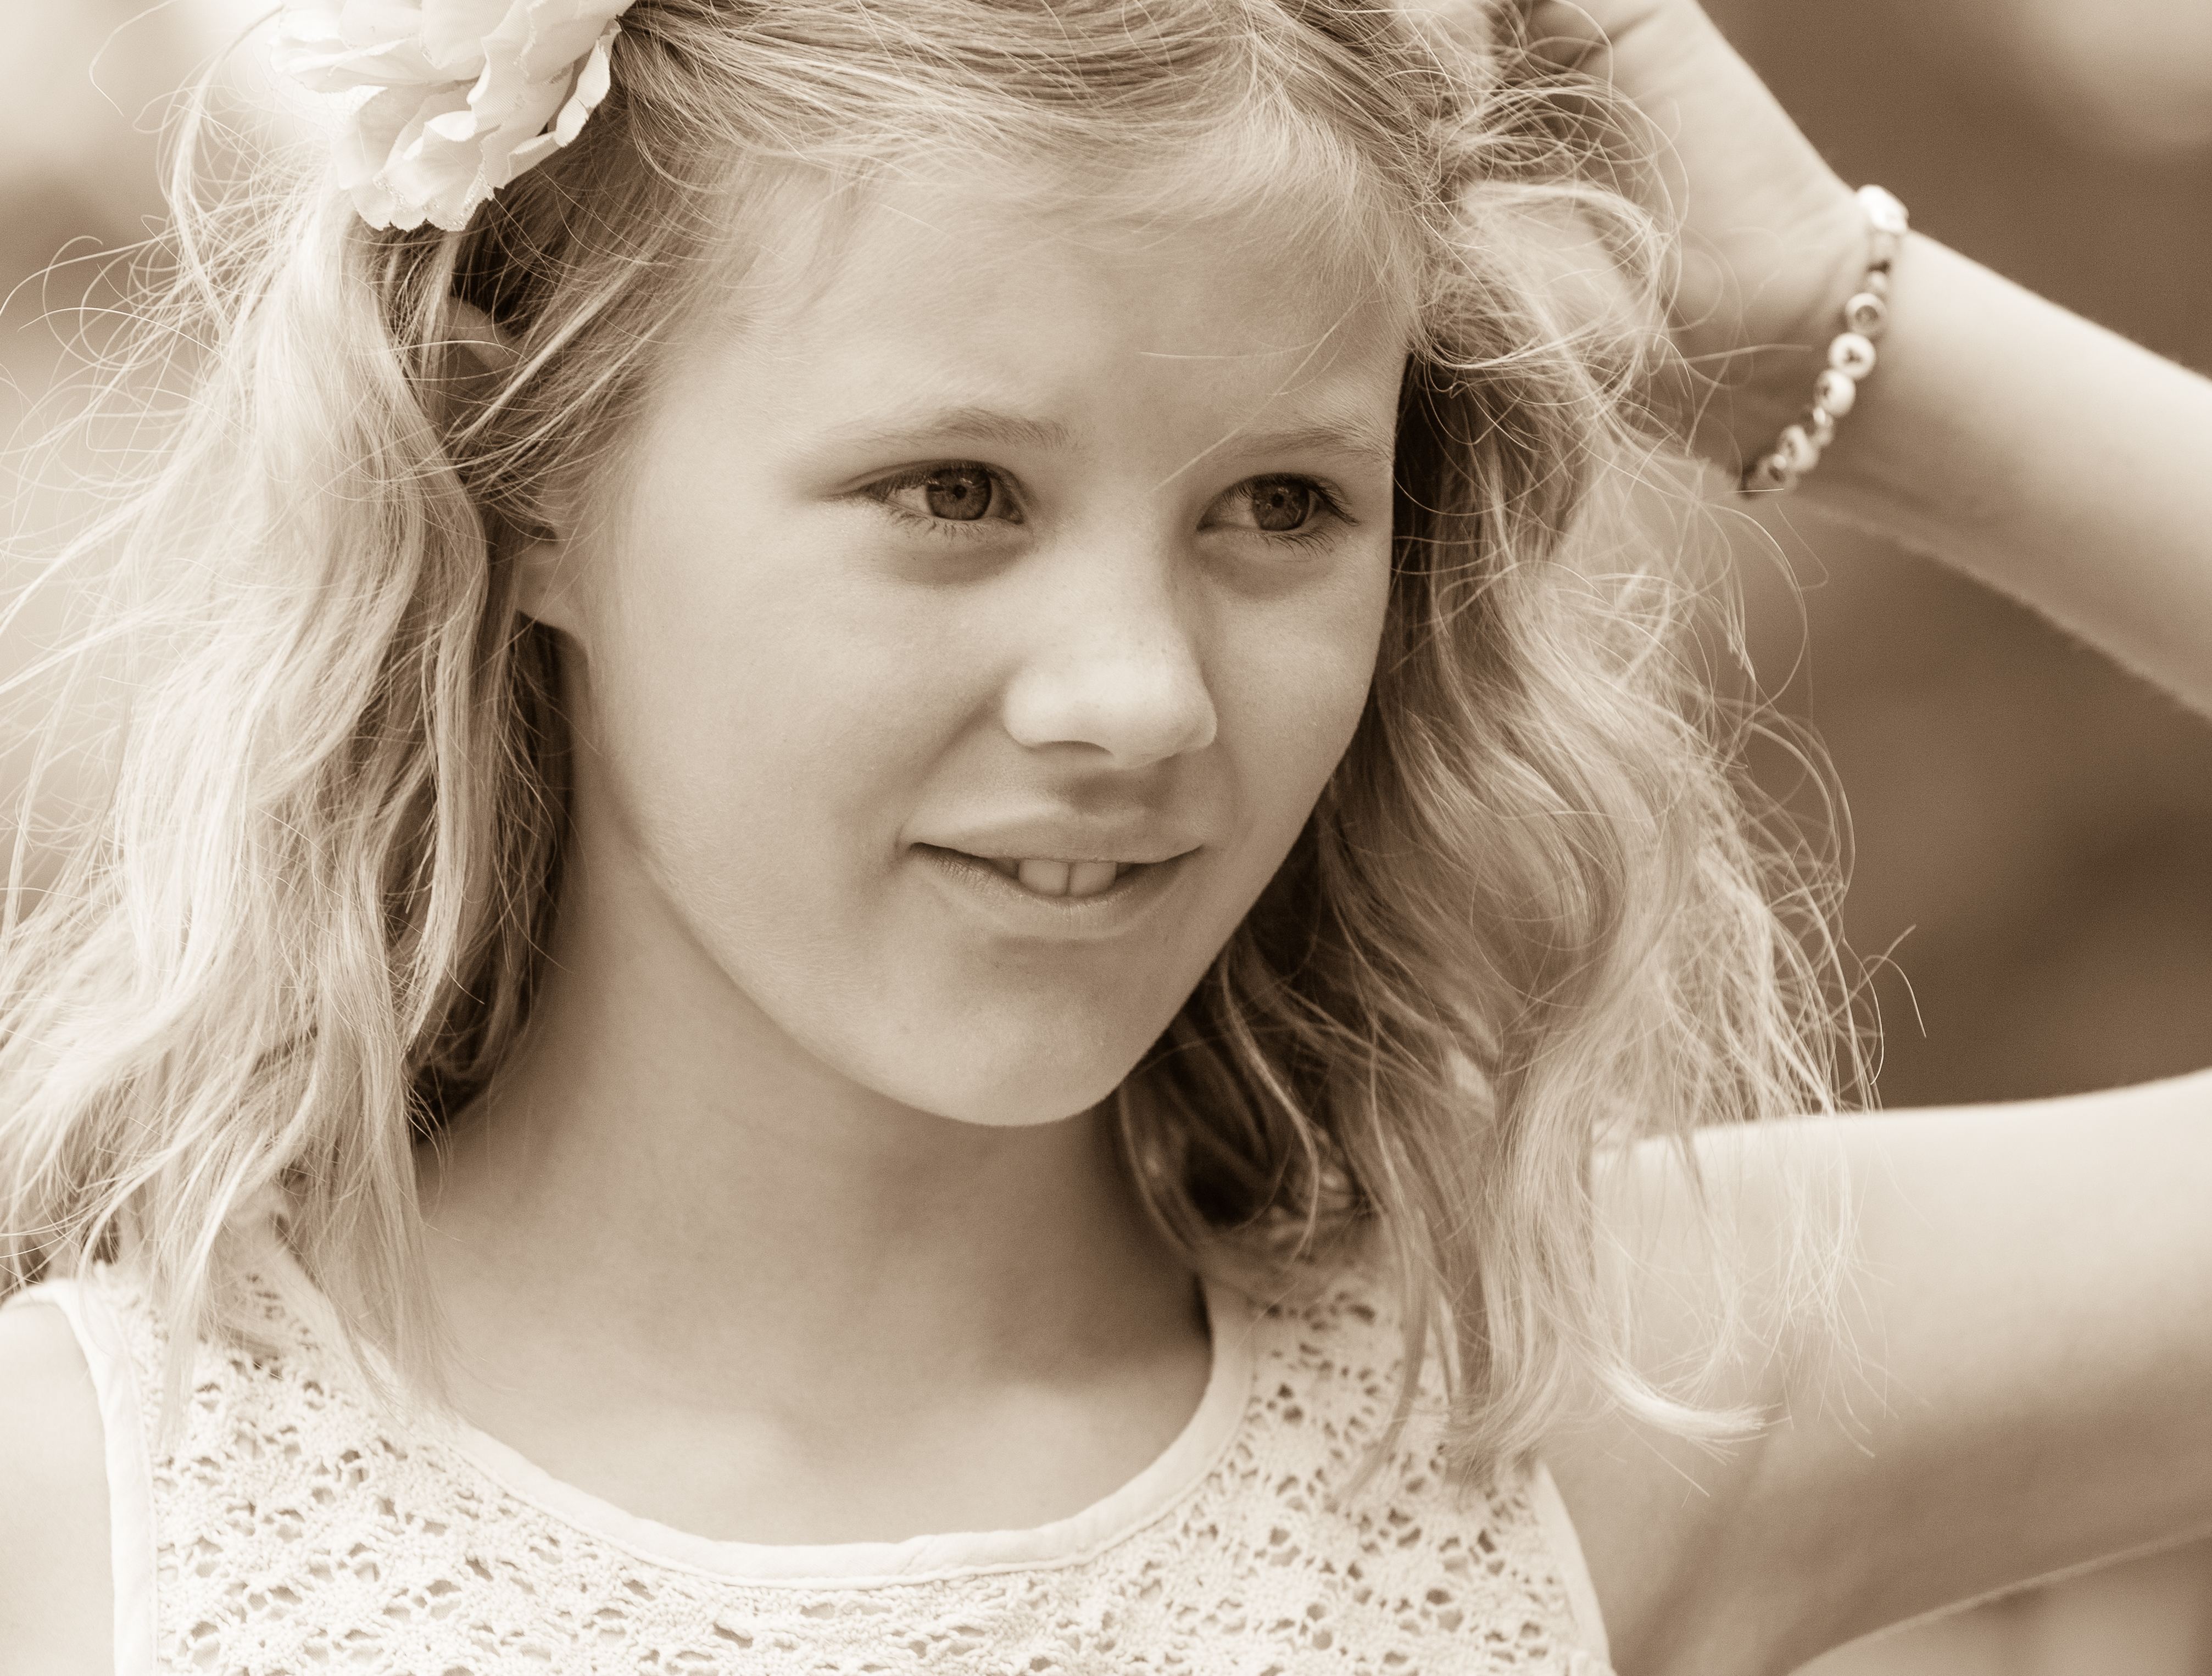 a blond beautiful girl photographed in Sigtuna, Sweden in June 2014, picture 10 out 20, a monochrome version